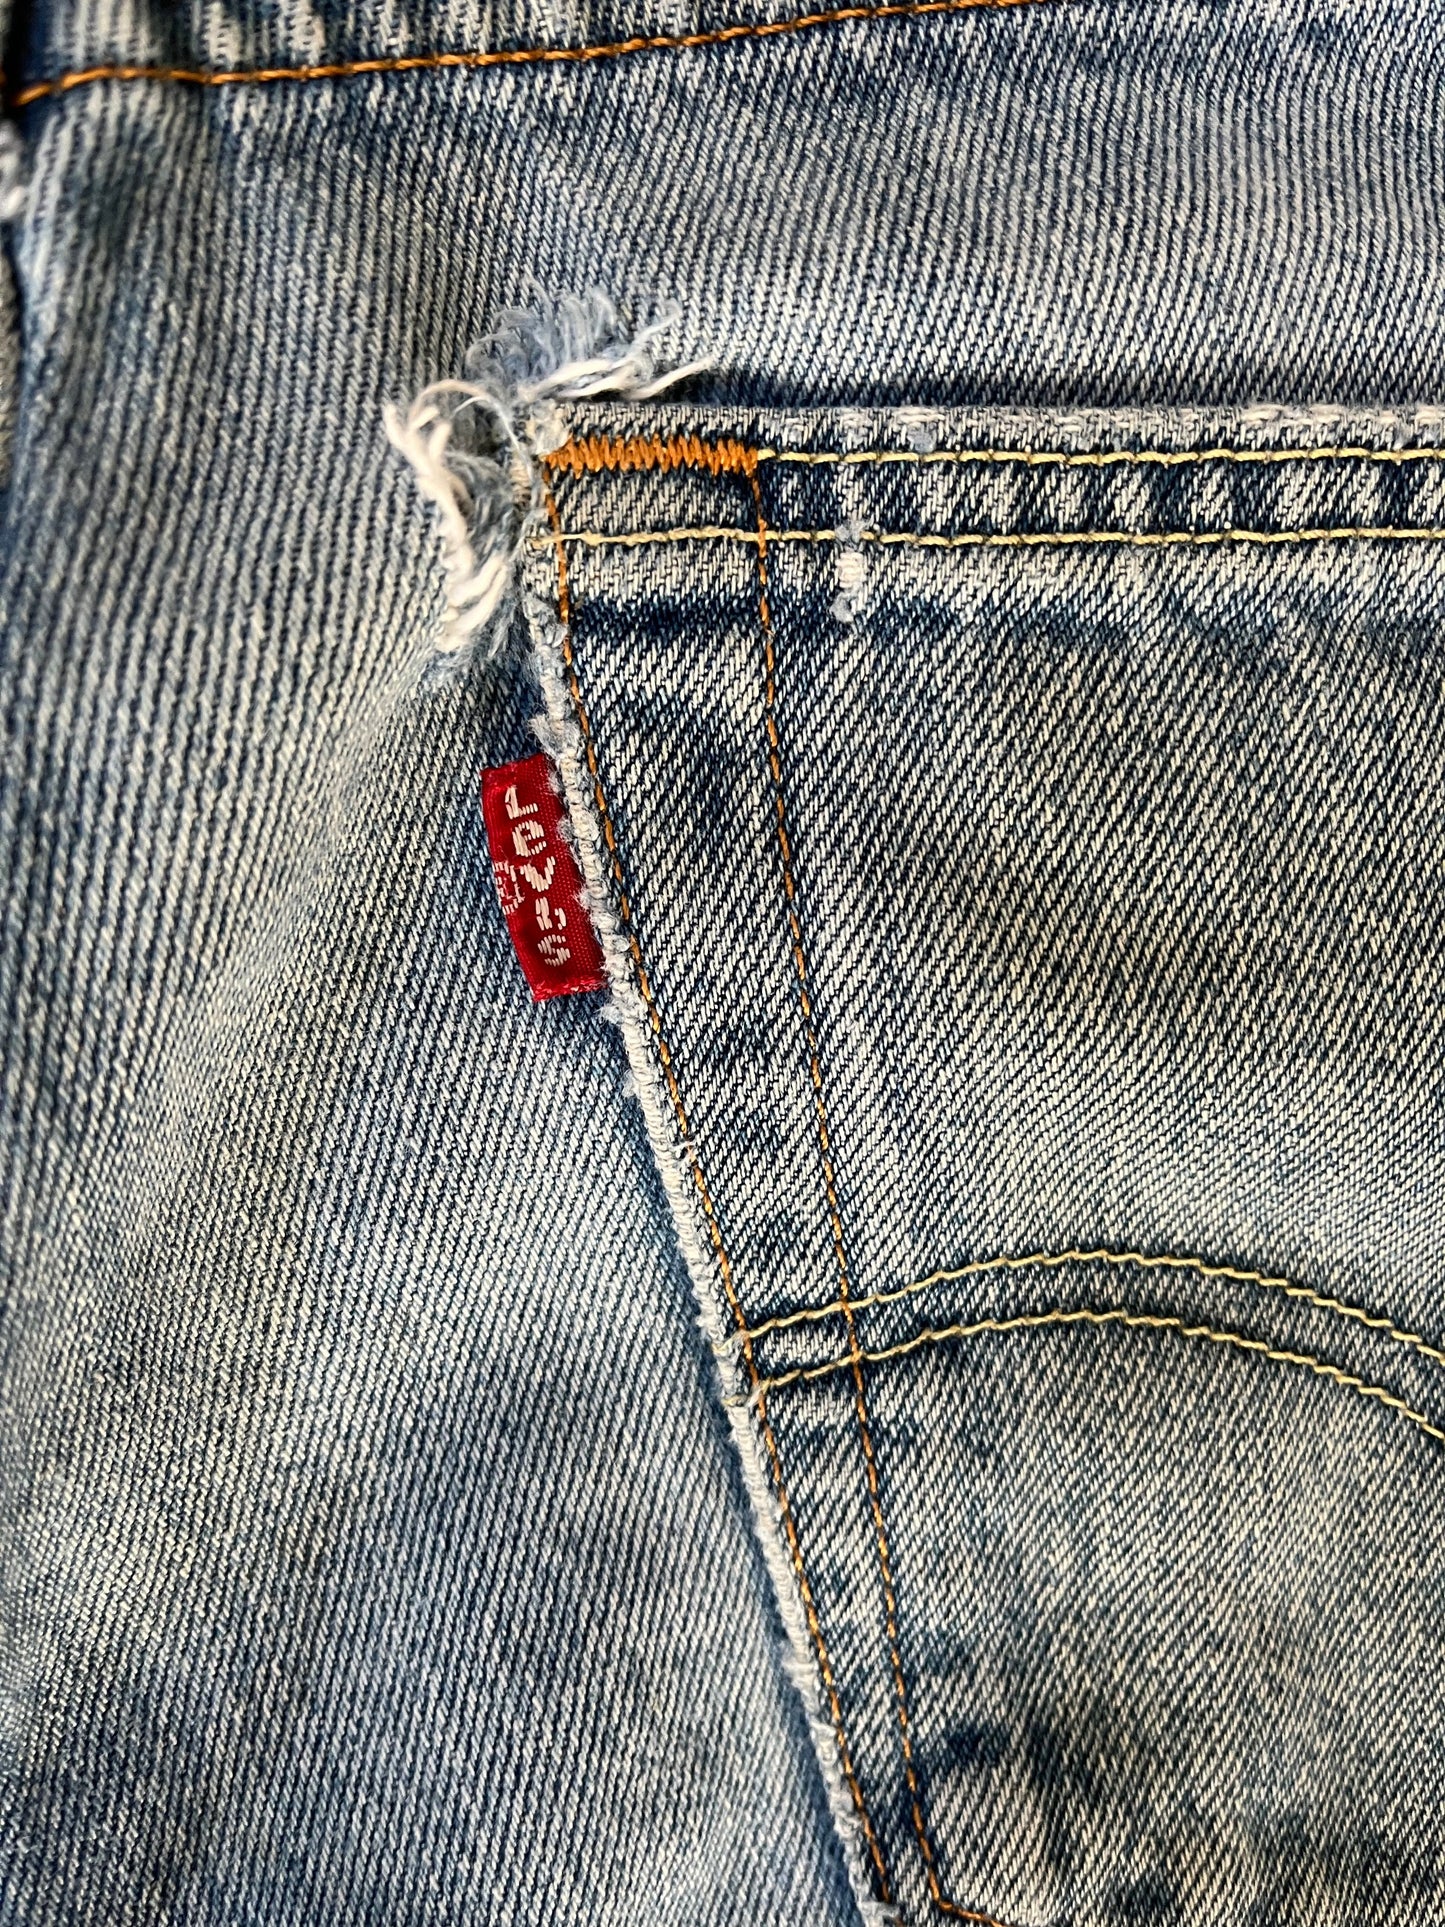 Levis Thrashed Red Tab Blue Jeans 31x30